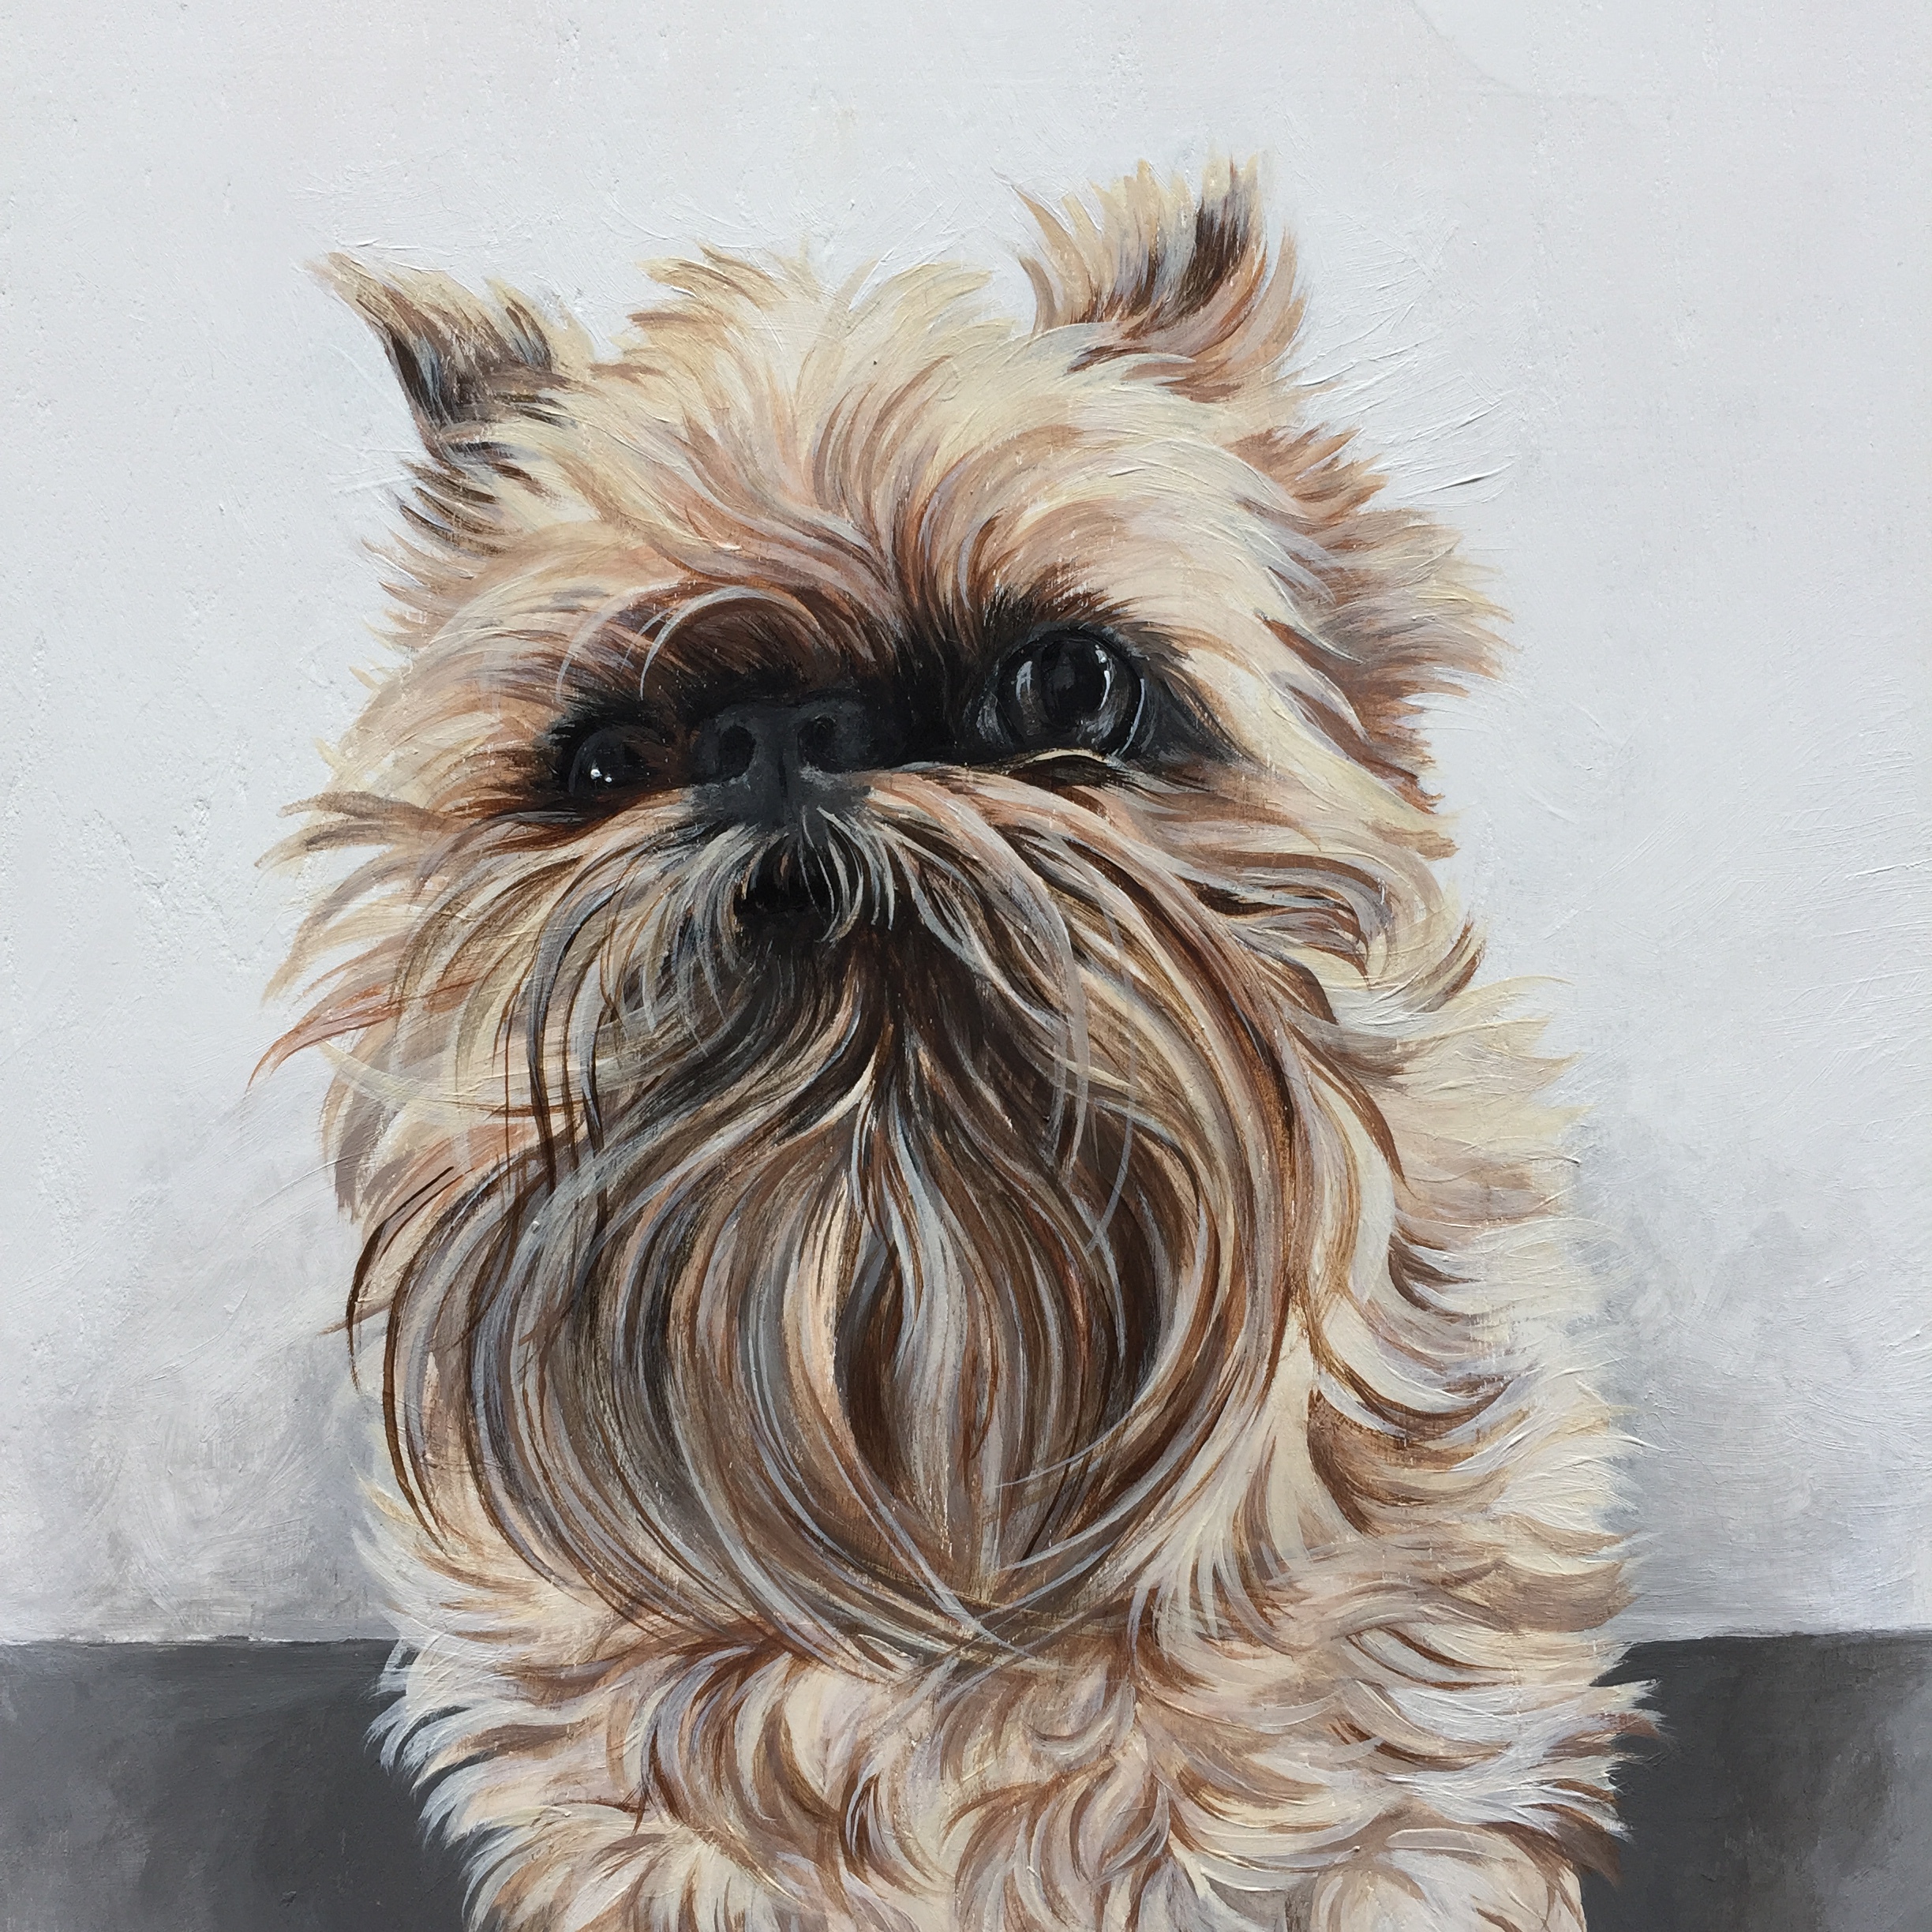  Chewie the Brussels Griffon - commissioned by Cassara 